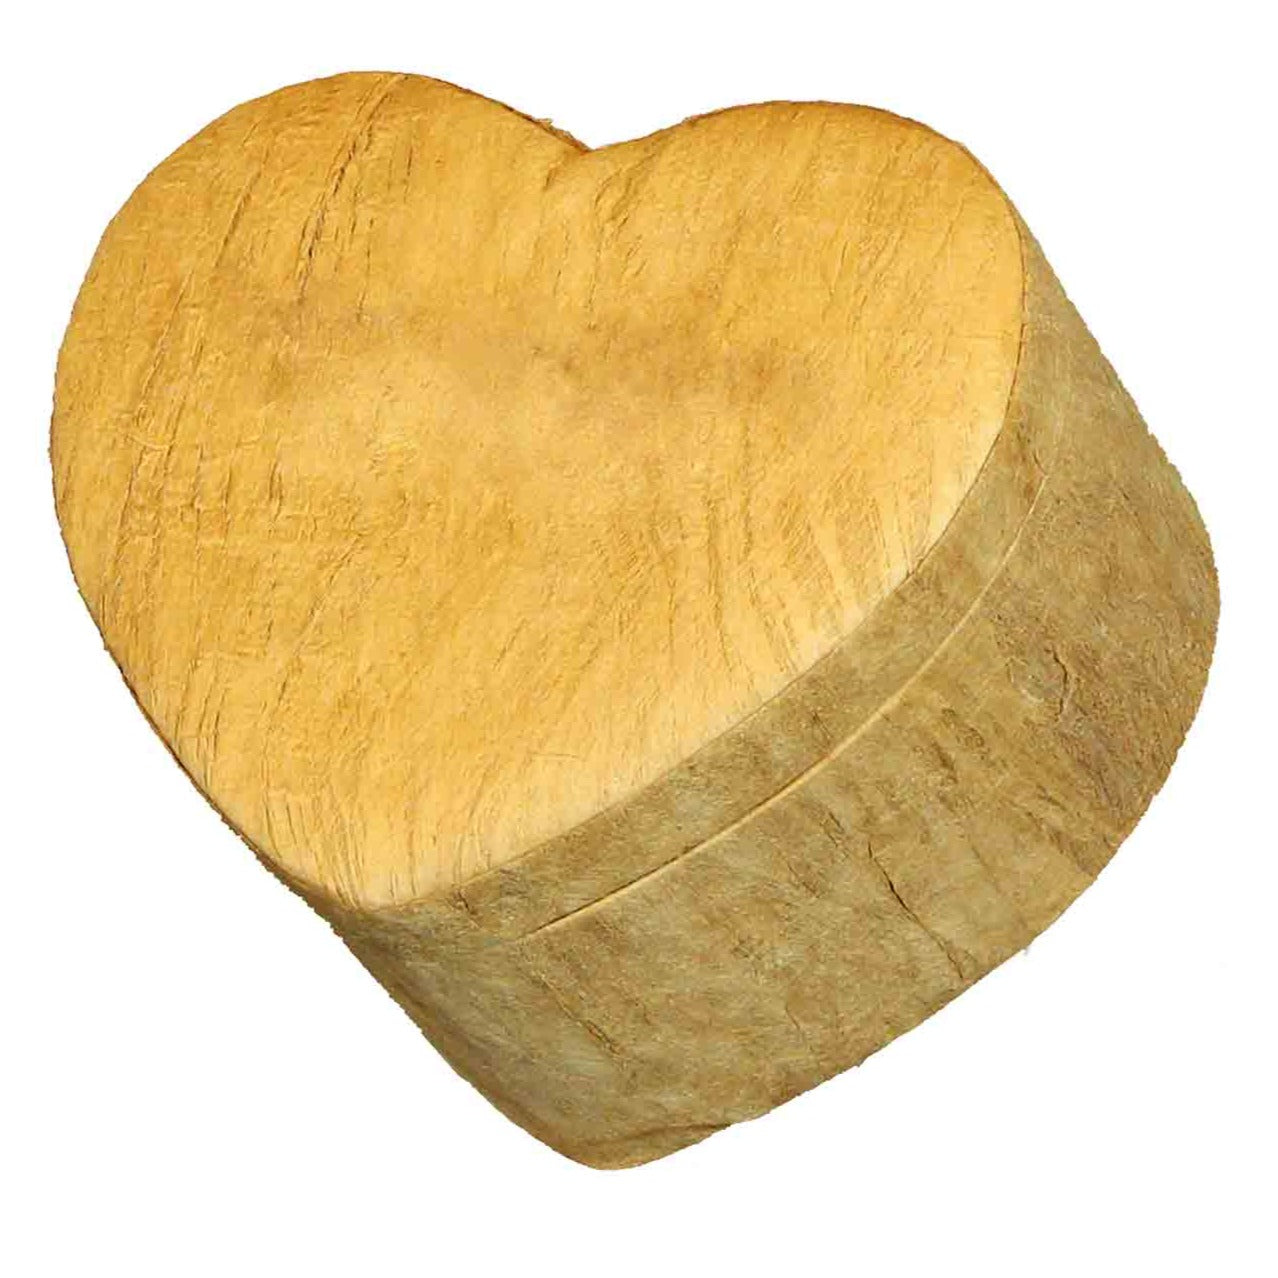 Heart Shaped Biodegradable Urn for Ashes in Wood Grain Medium